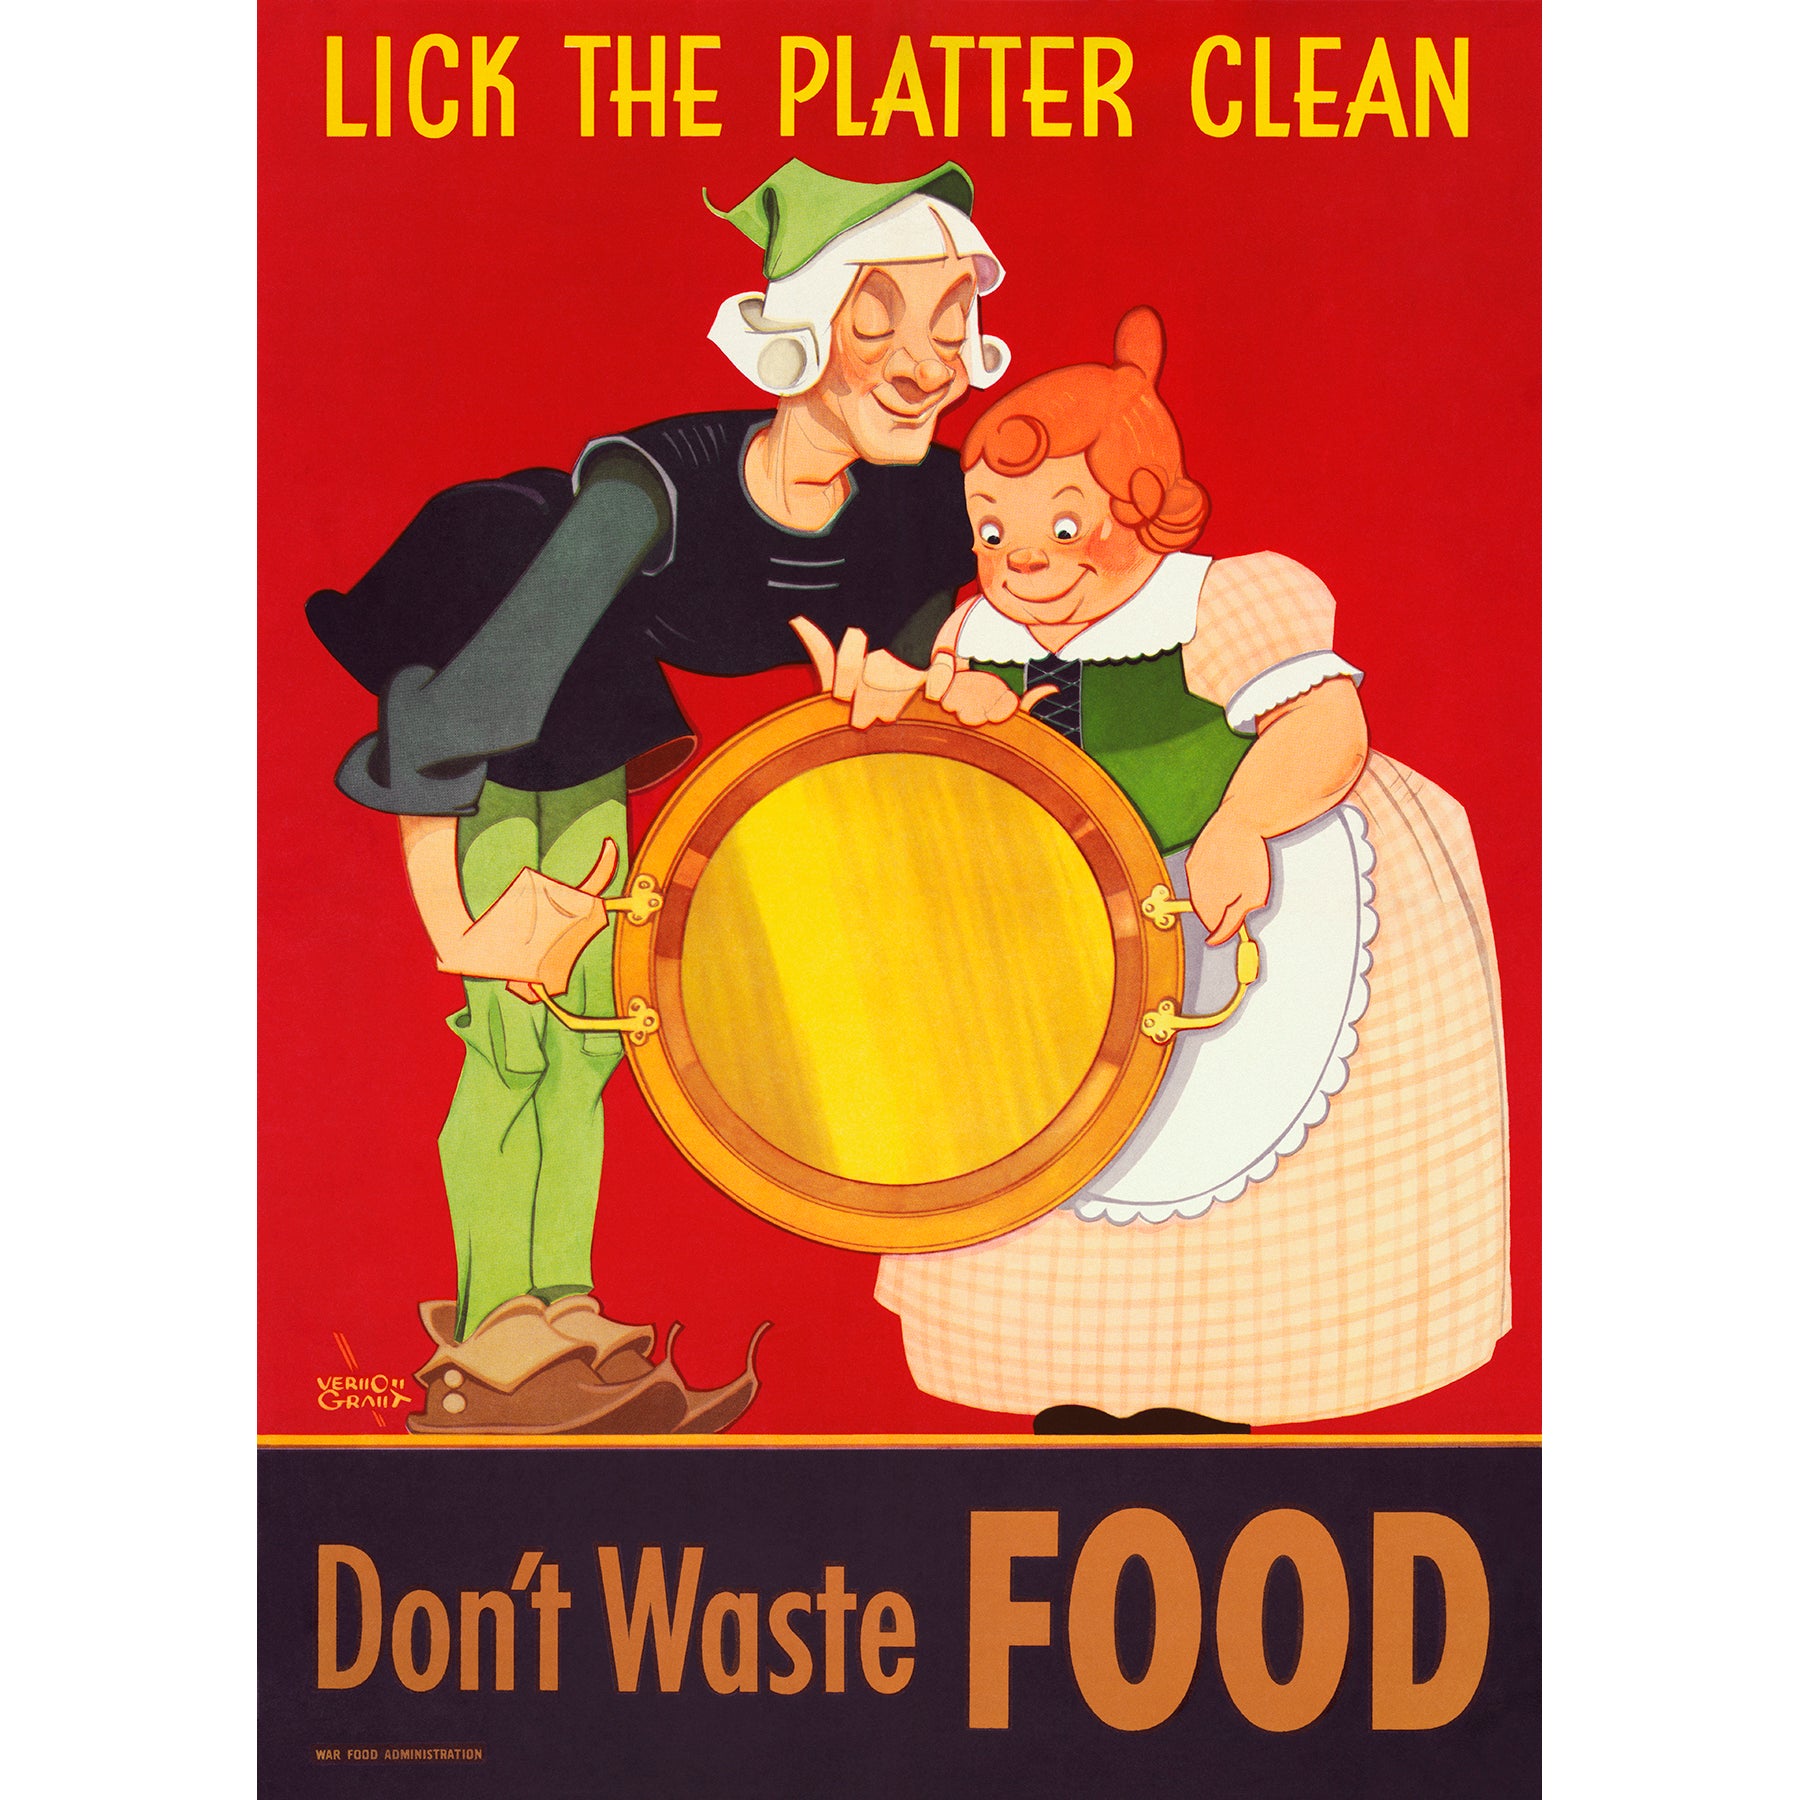 A vintage poster featuring the slogan "lick the platter clean - don't waste food"